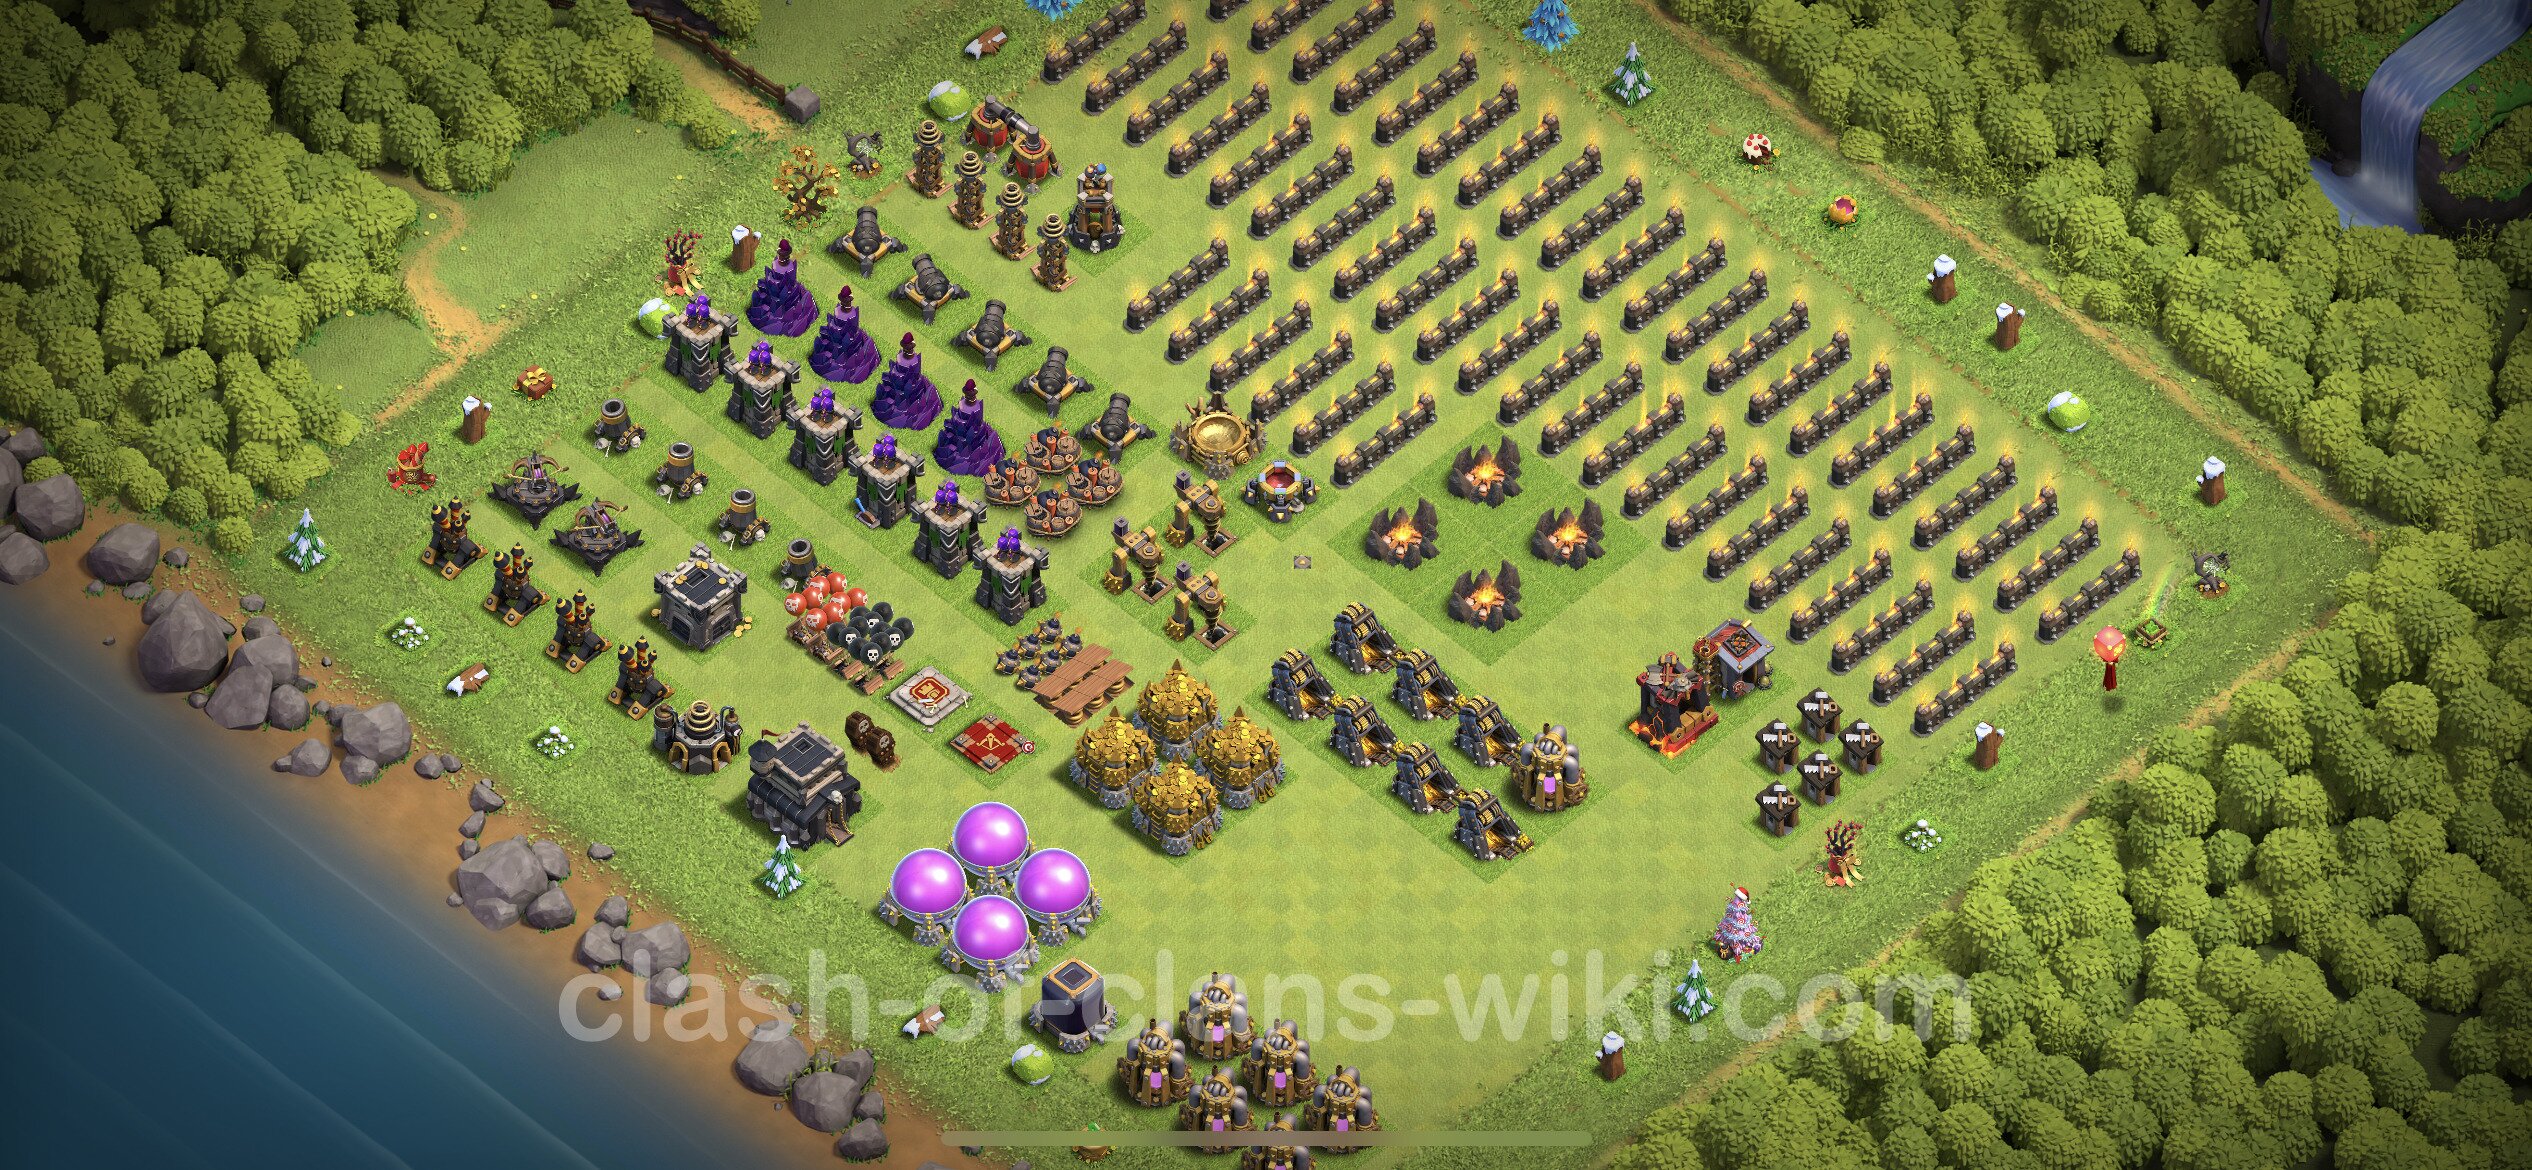 Funny Troll Base TH9 with Link - Town Hall Level 9 Art Base Copy, #2